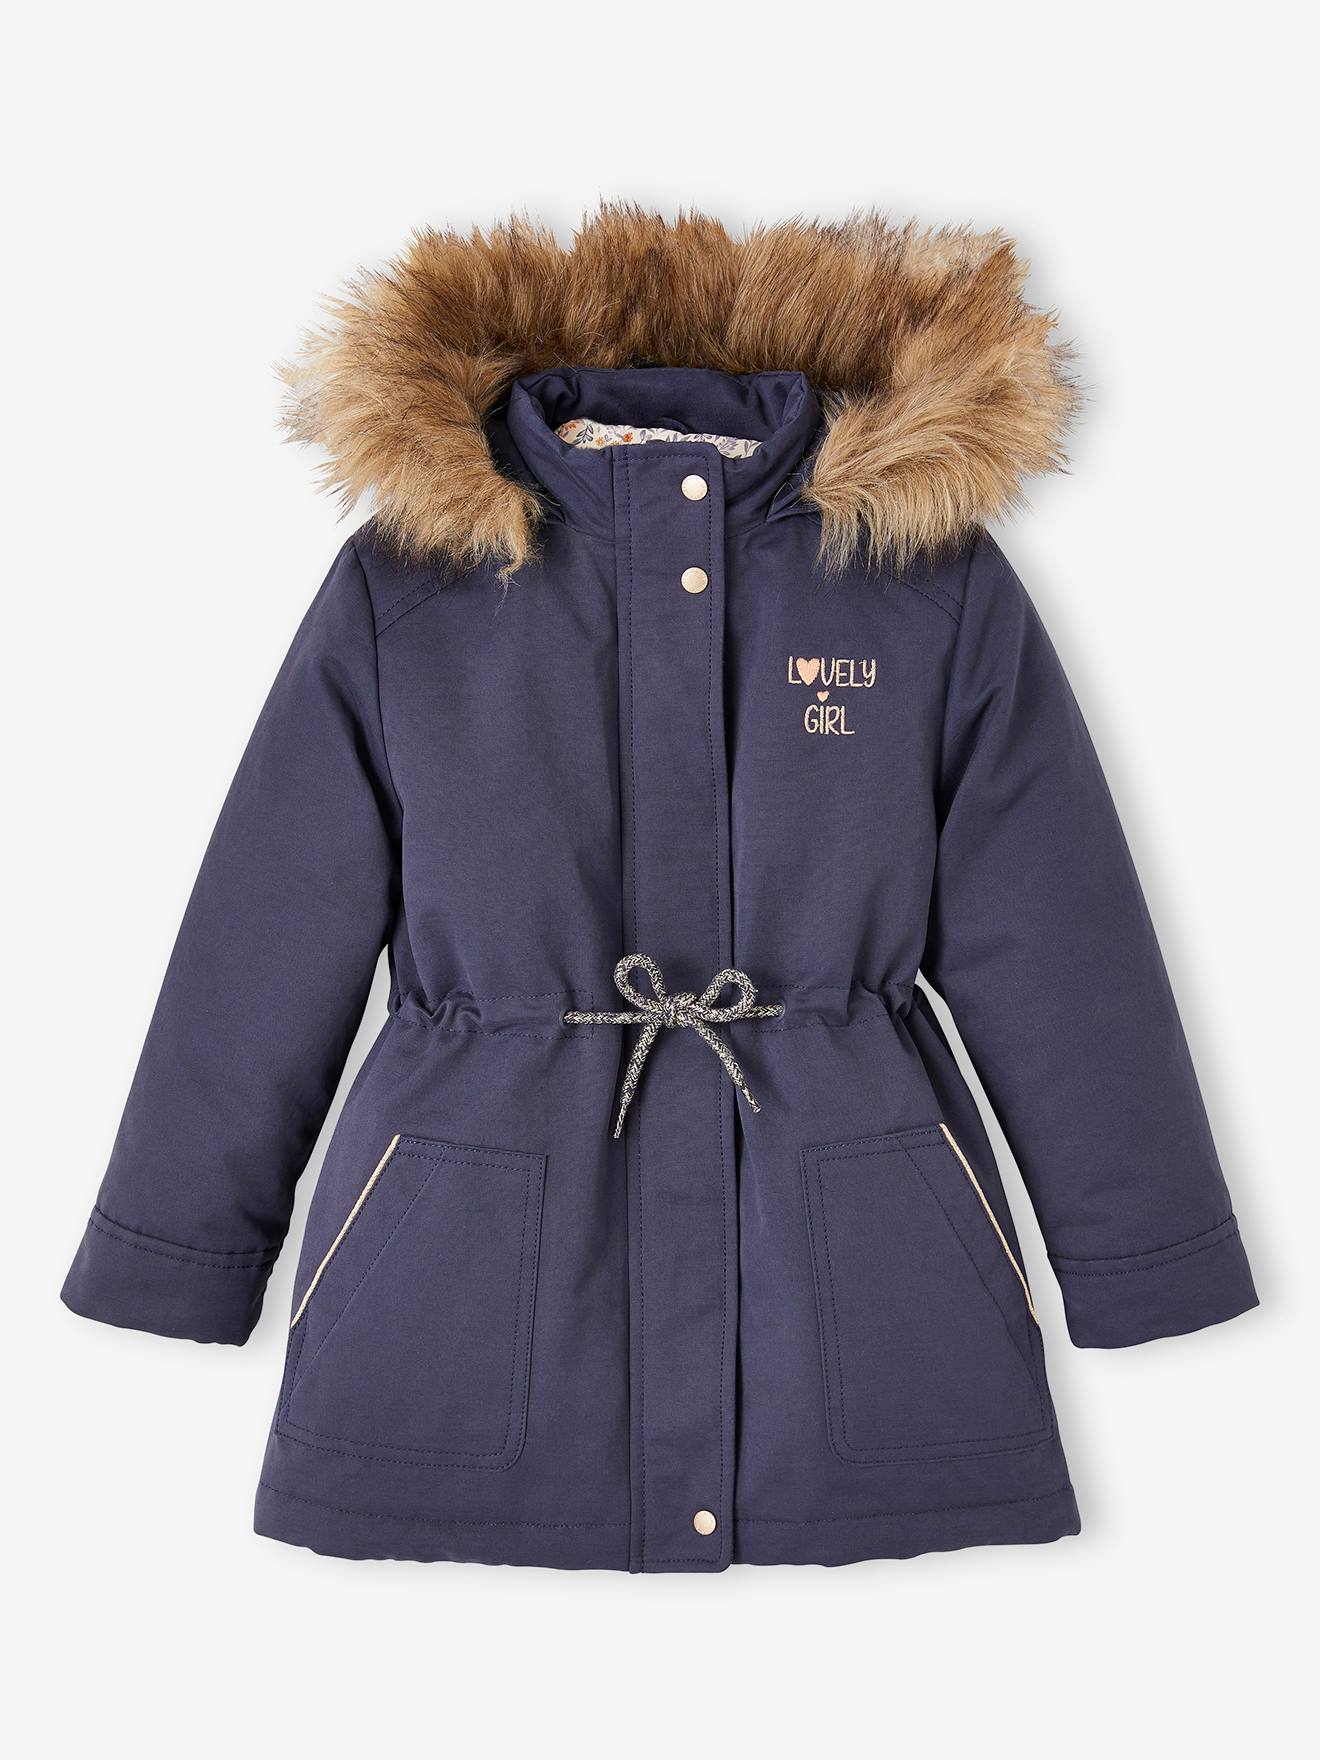 3-in-1 Parka with Hood for Girls navy blue